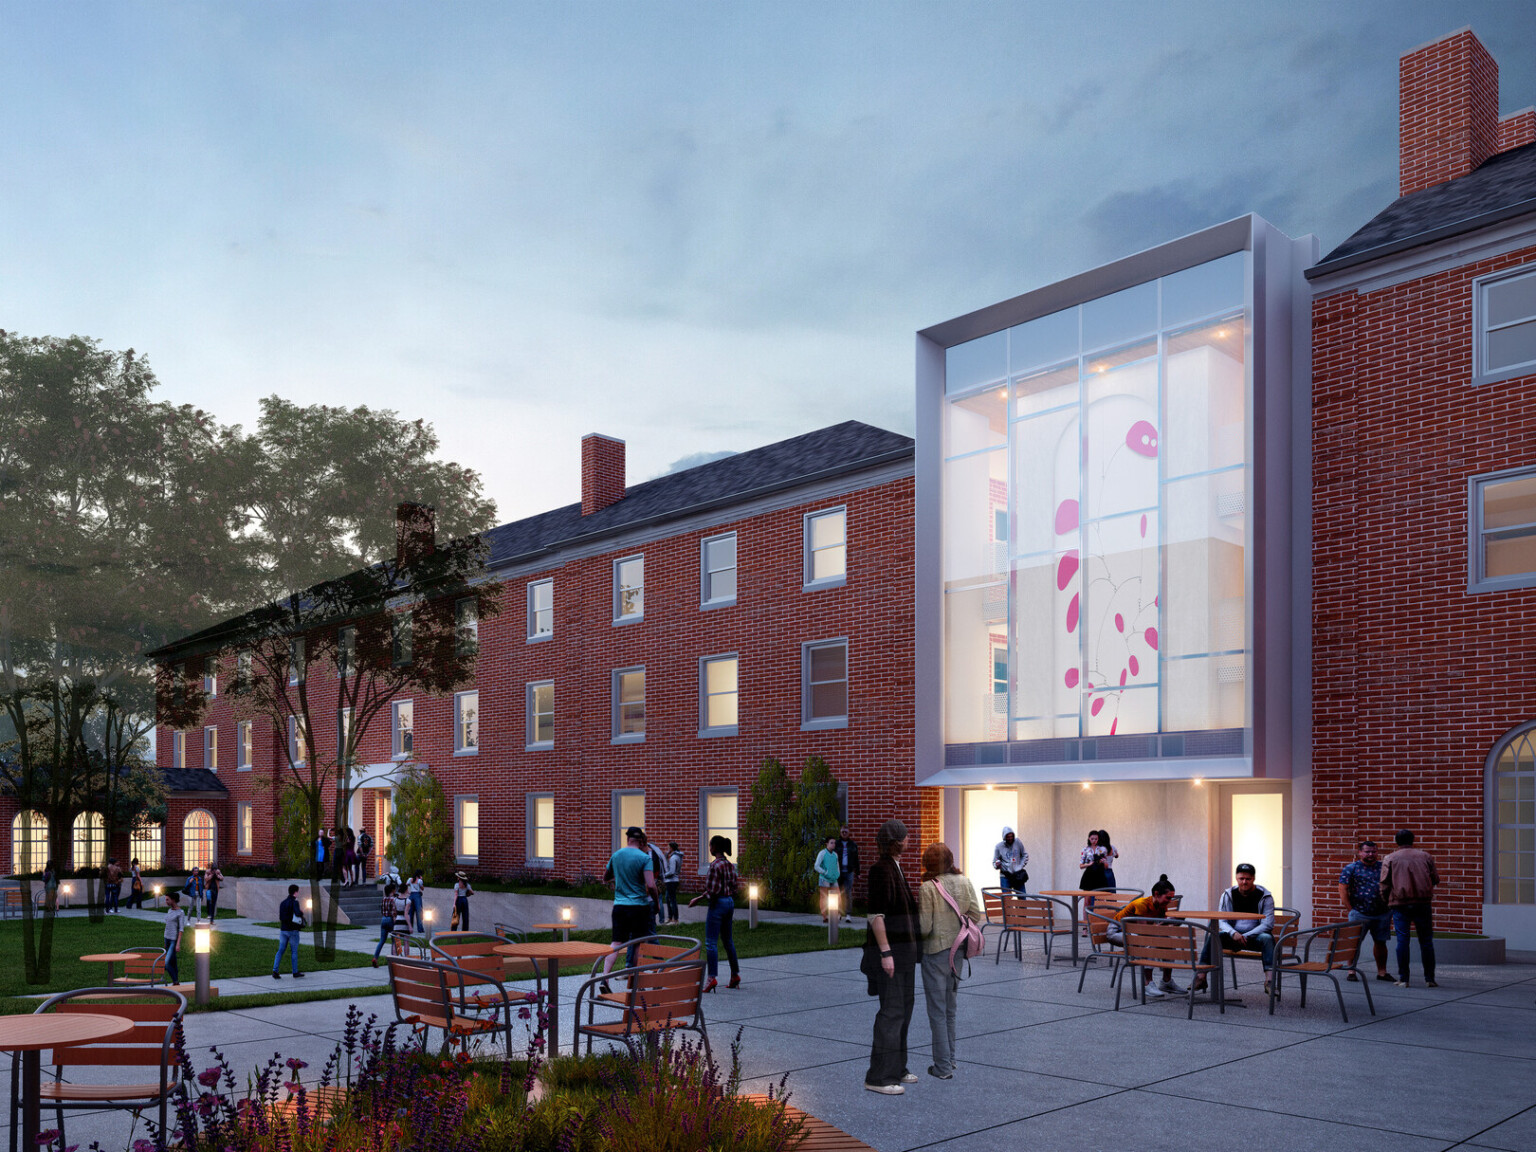 Rendering of a university campus building at dusk with large glass windows and a common area filled with tables and chairs